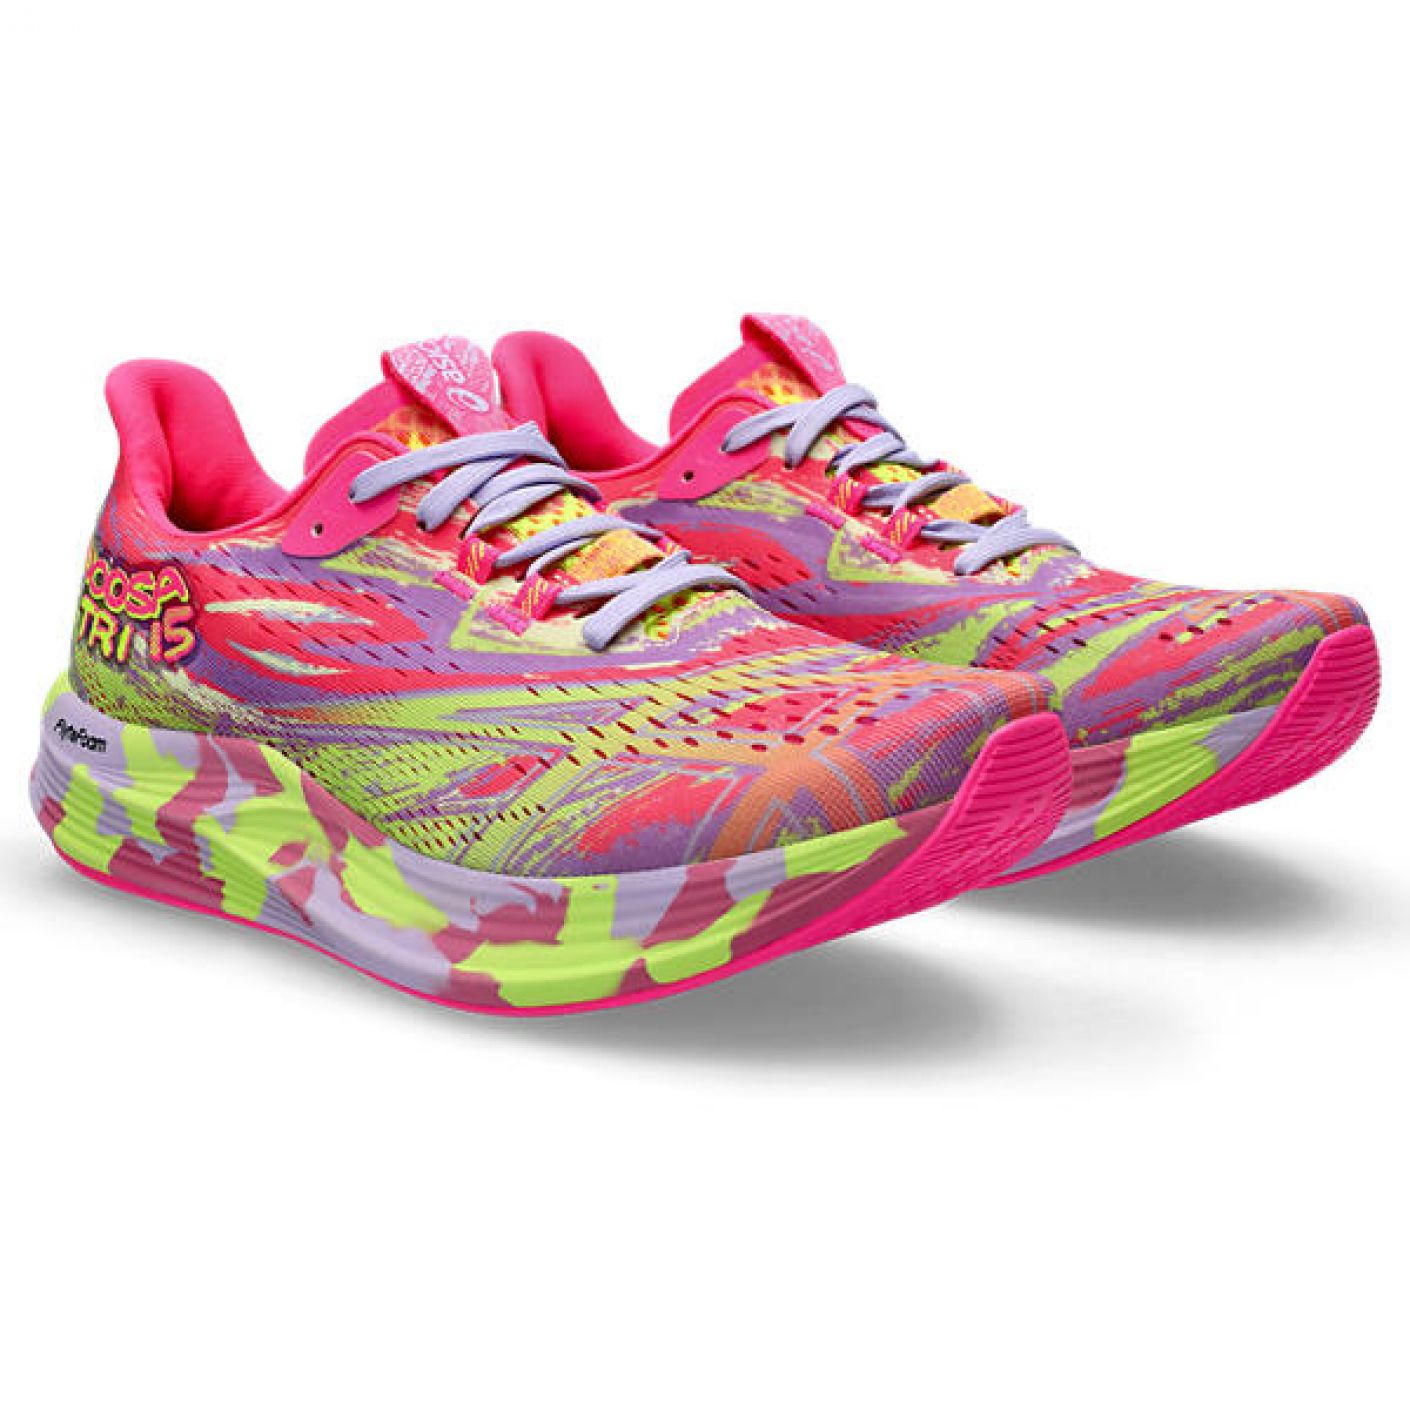 Asics Noosa Tri 15 Hot Pink/Safety Yellow for Women